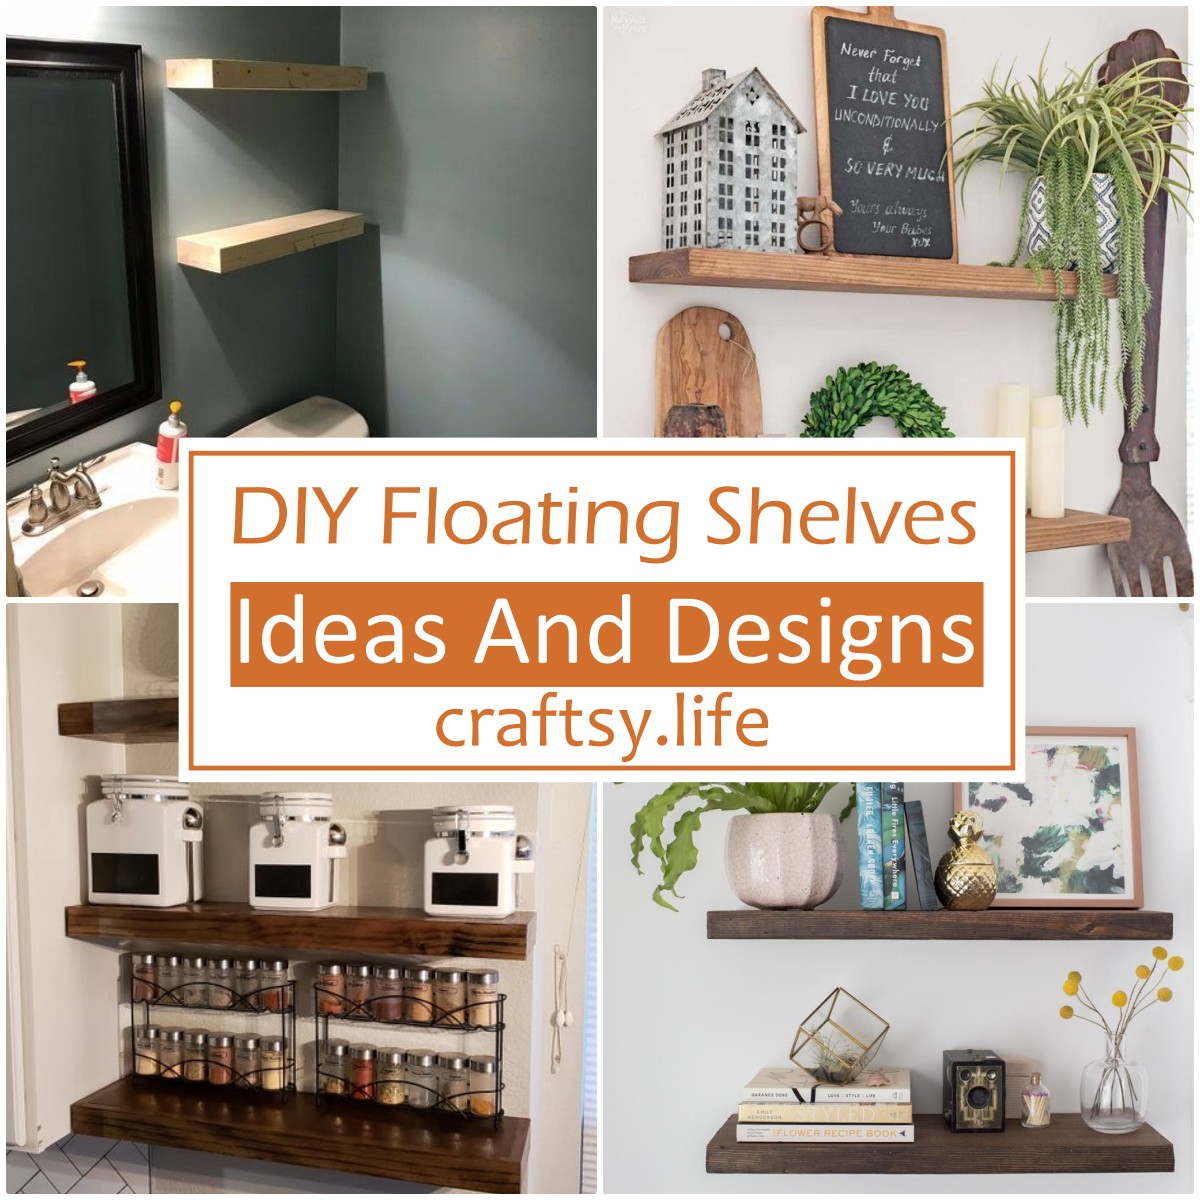 DIY Floating Shelves Ideas And Designs